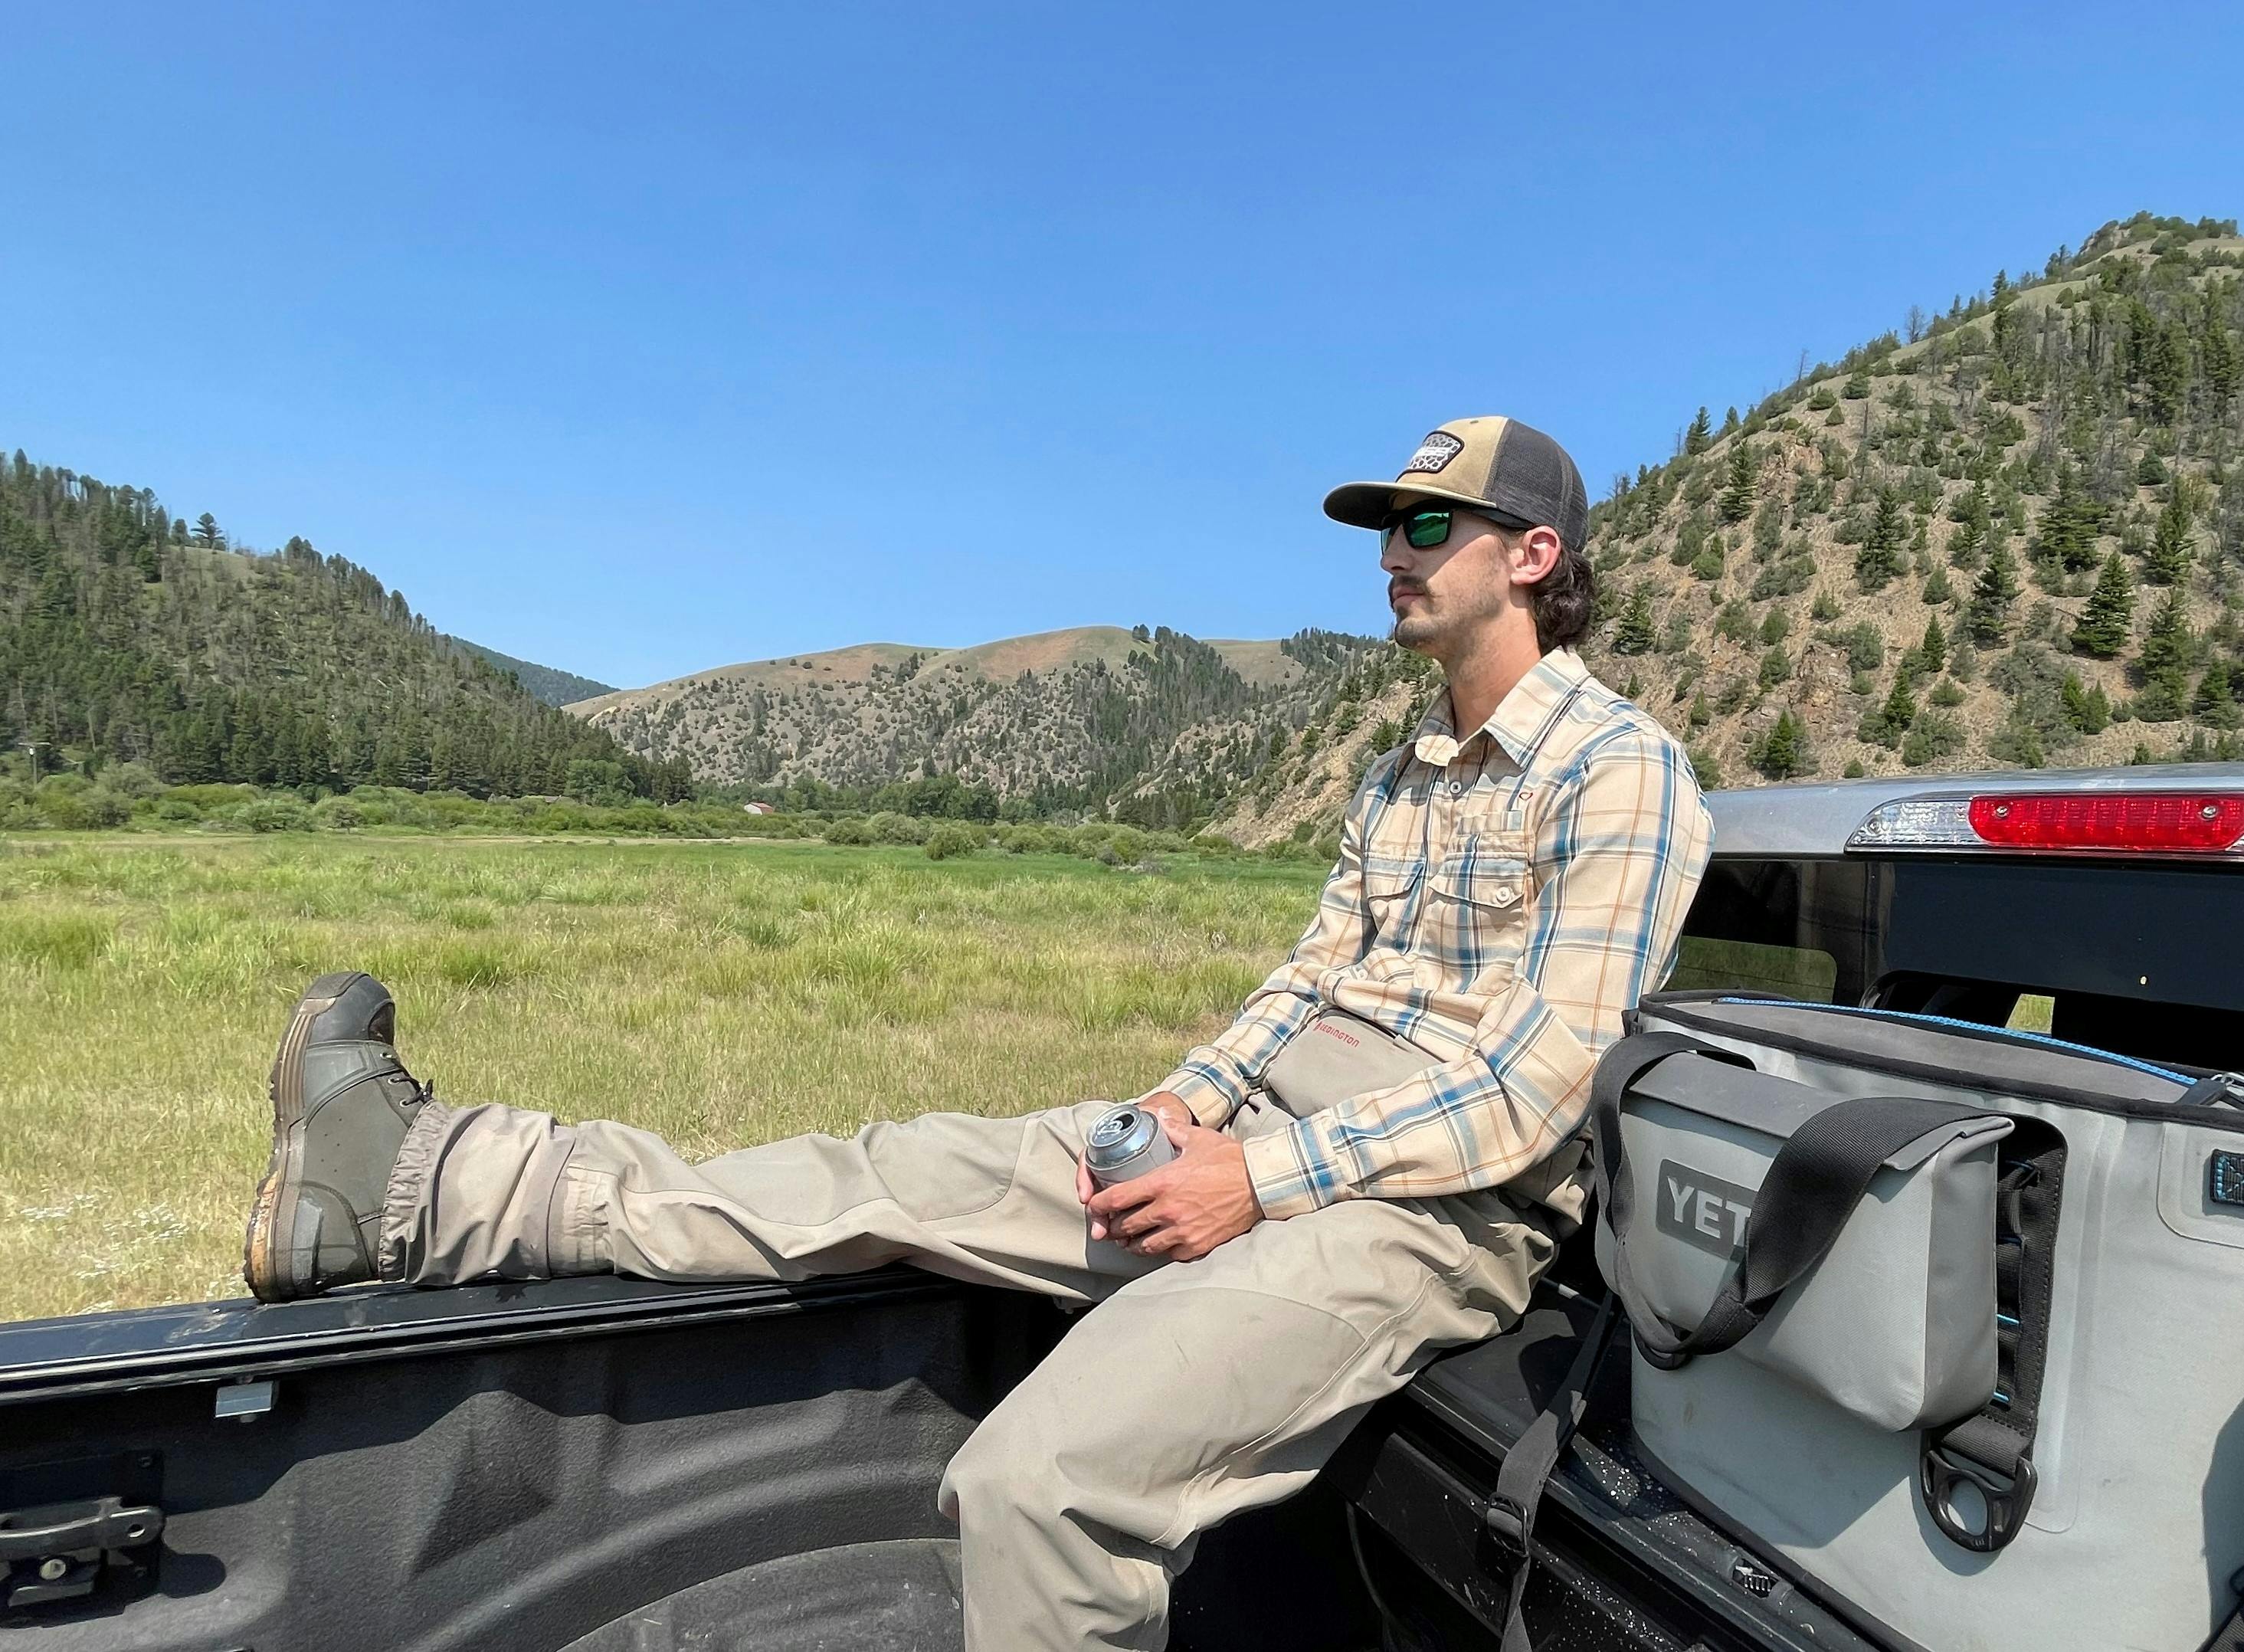 The author sits in the back of his truck, next to a Yeti cooler. He wears waders, boots, and drinks a beer looking out into the distance.